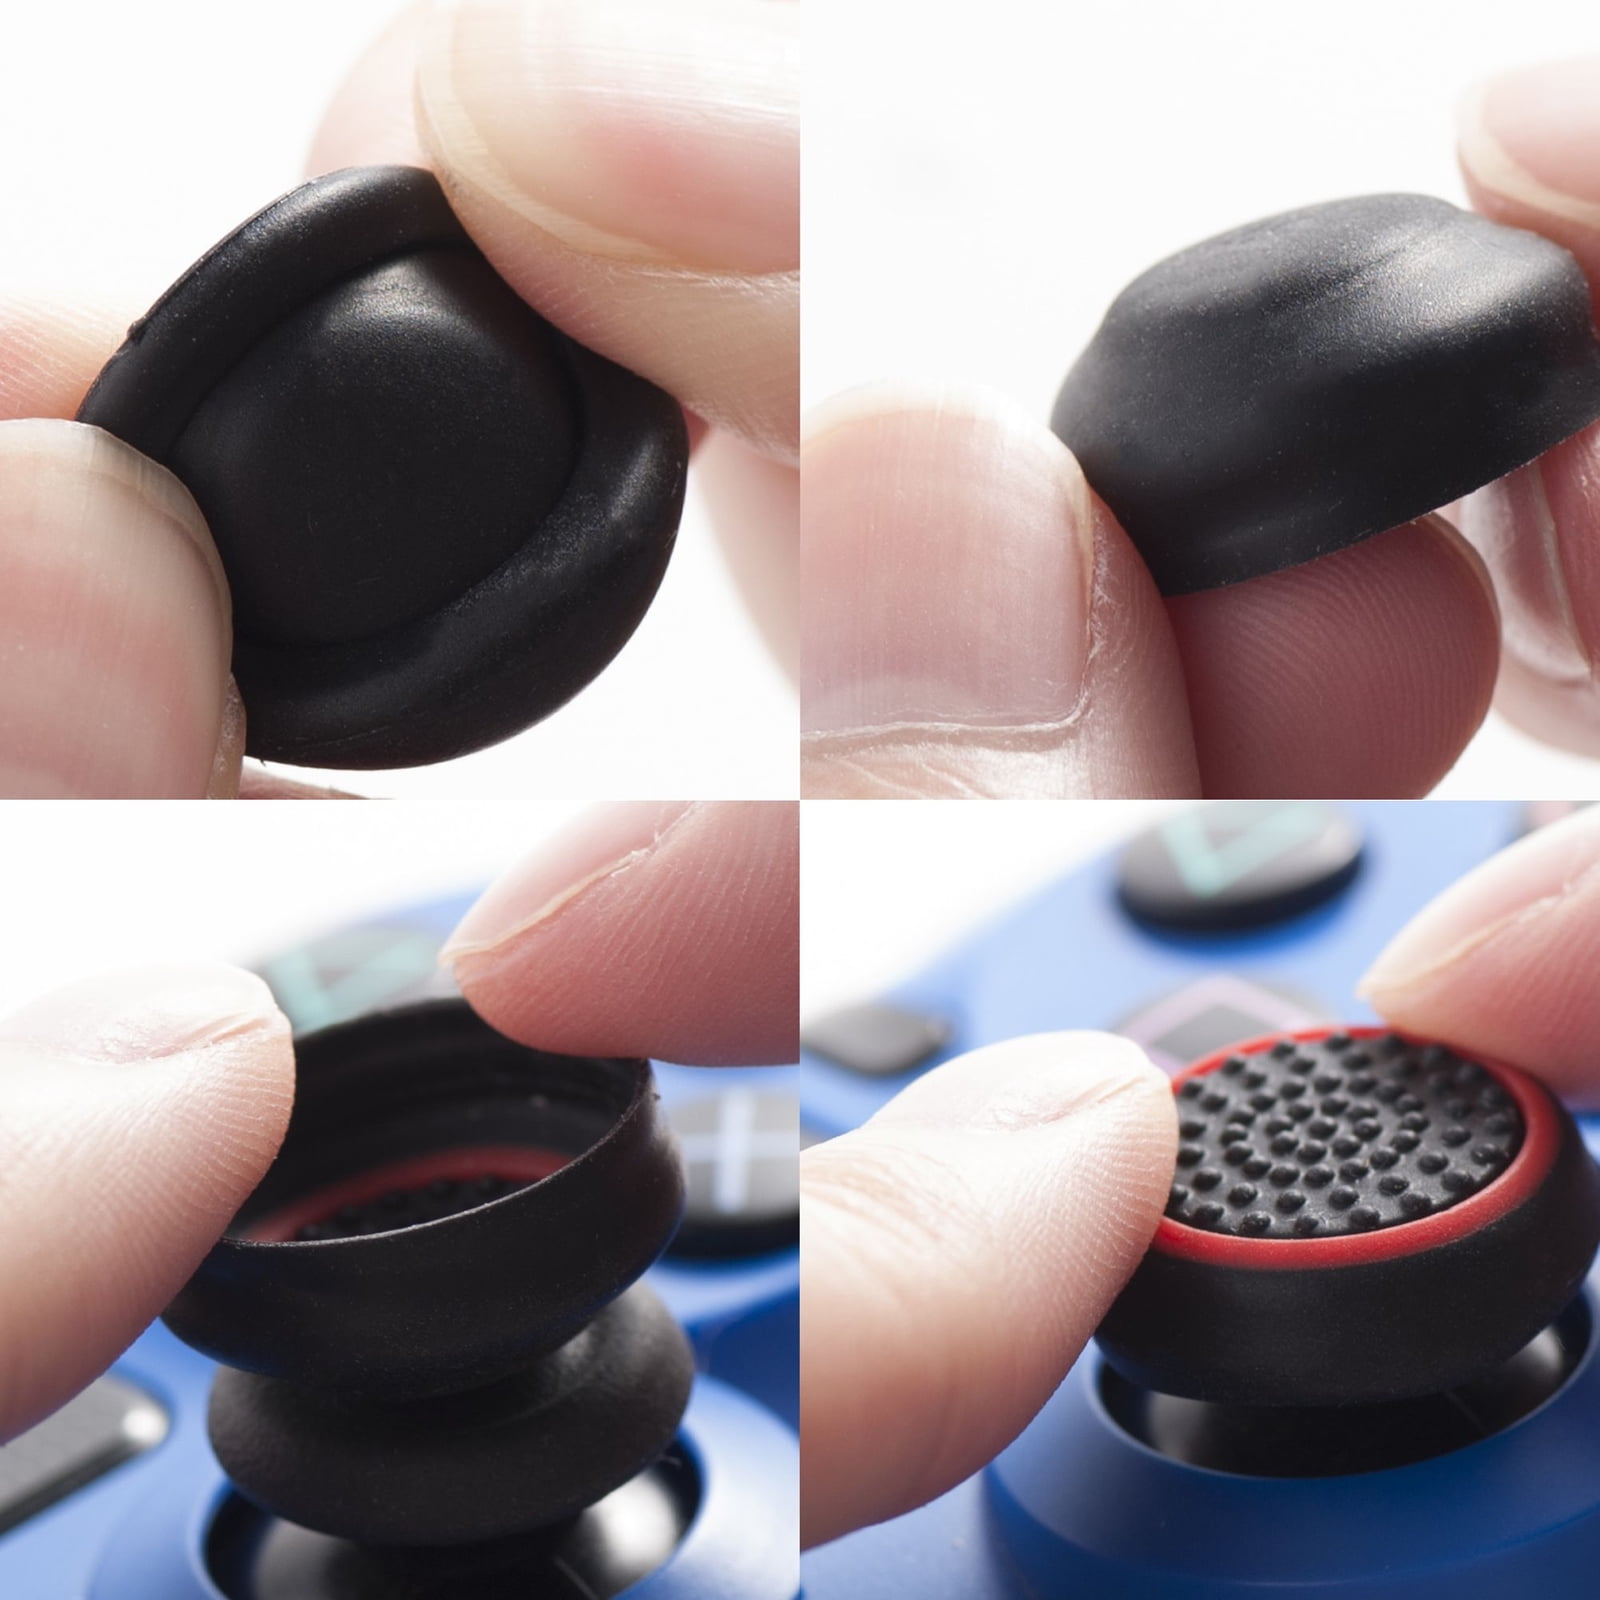 for PS5 PS4 PS3 Xbox 360 Xbox One Switch Pro Wii u Controller Silicone  Thumb Grip Cap Joystick Thumbstick (#J) 